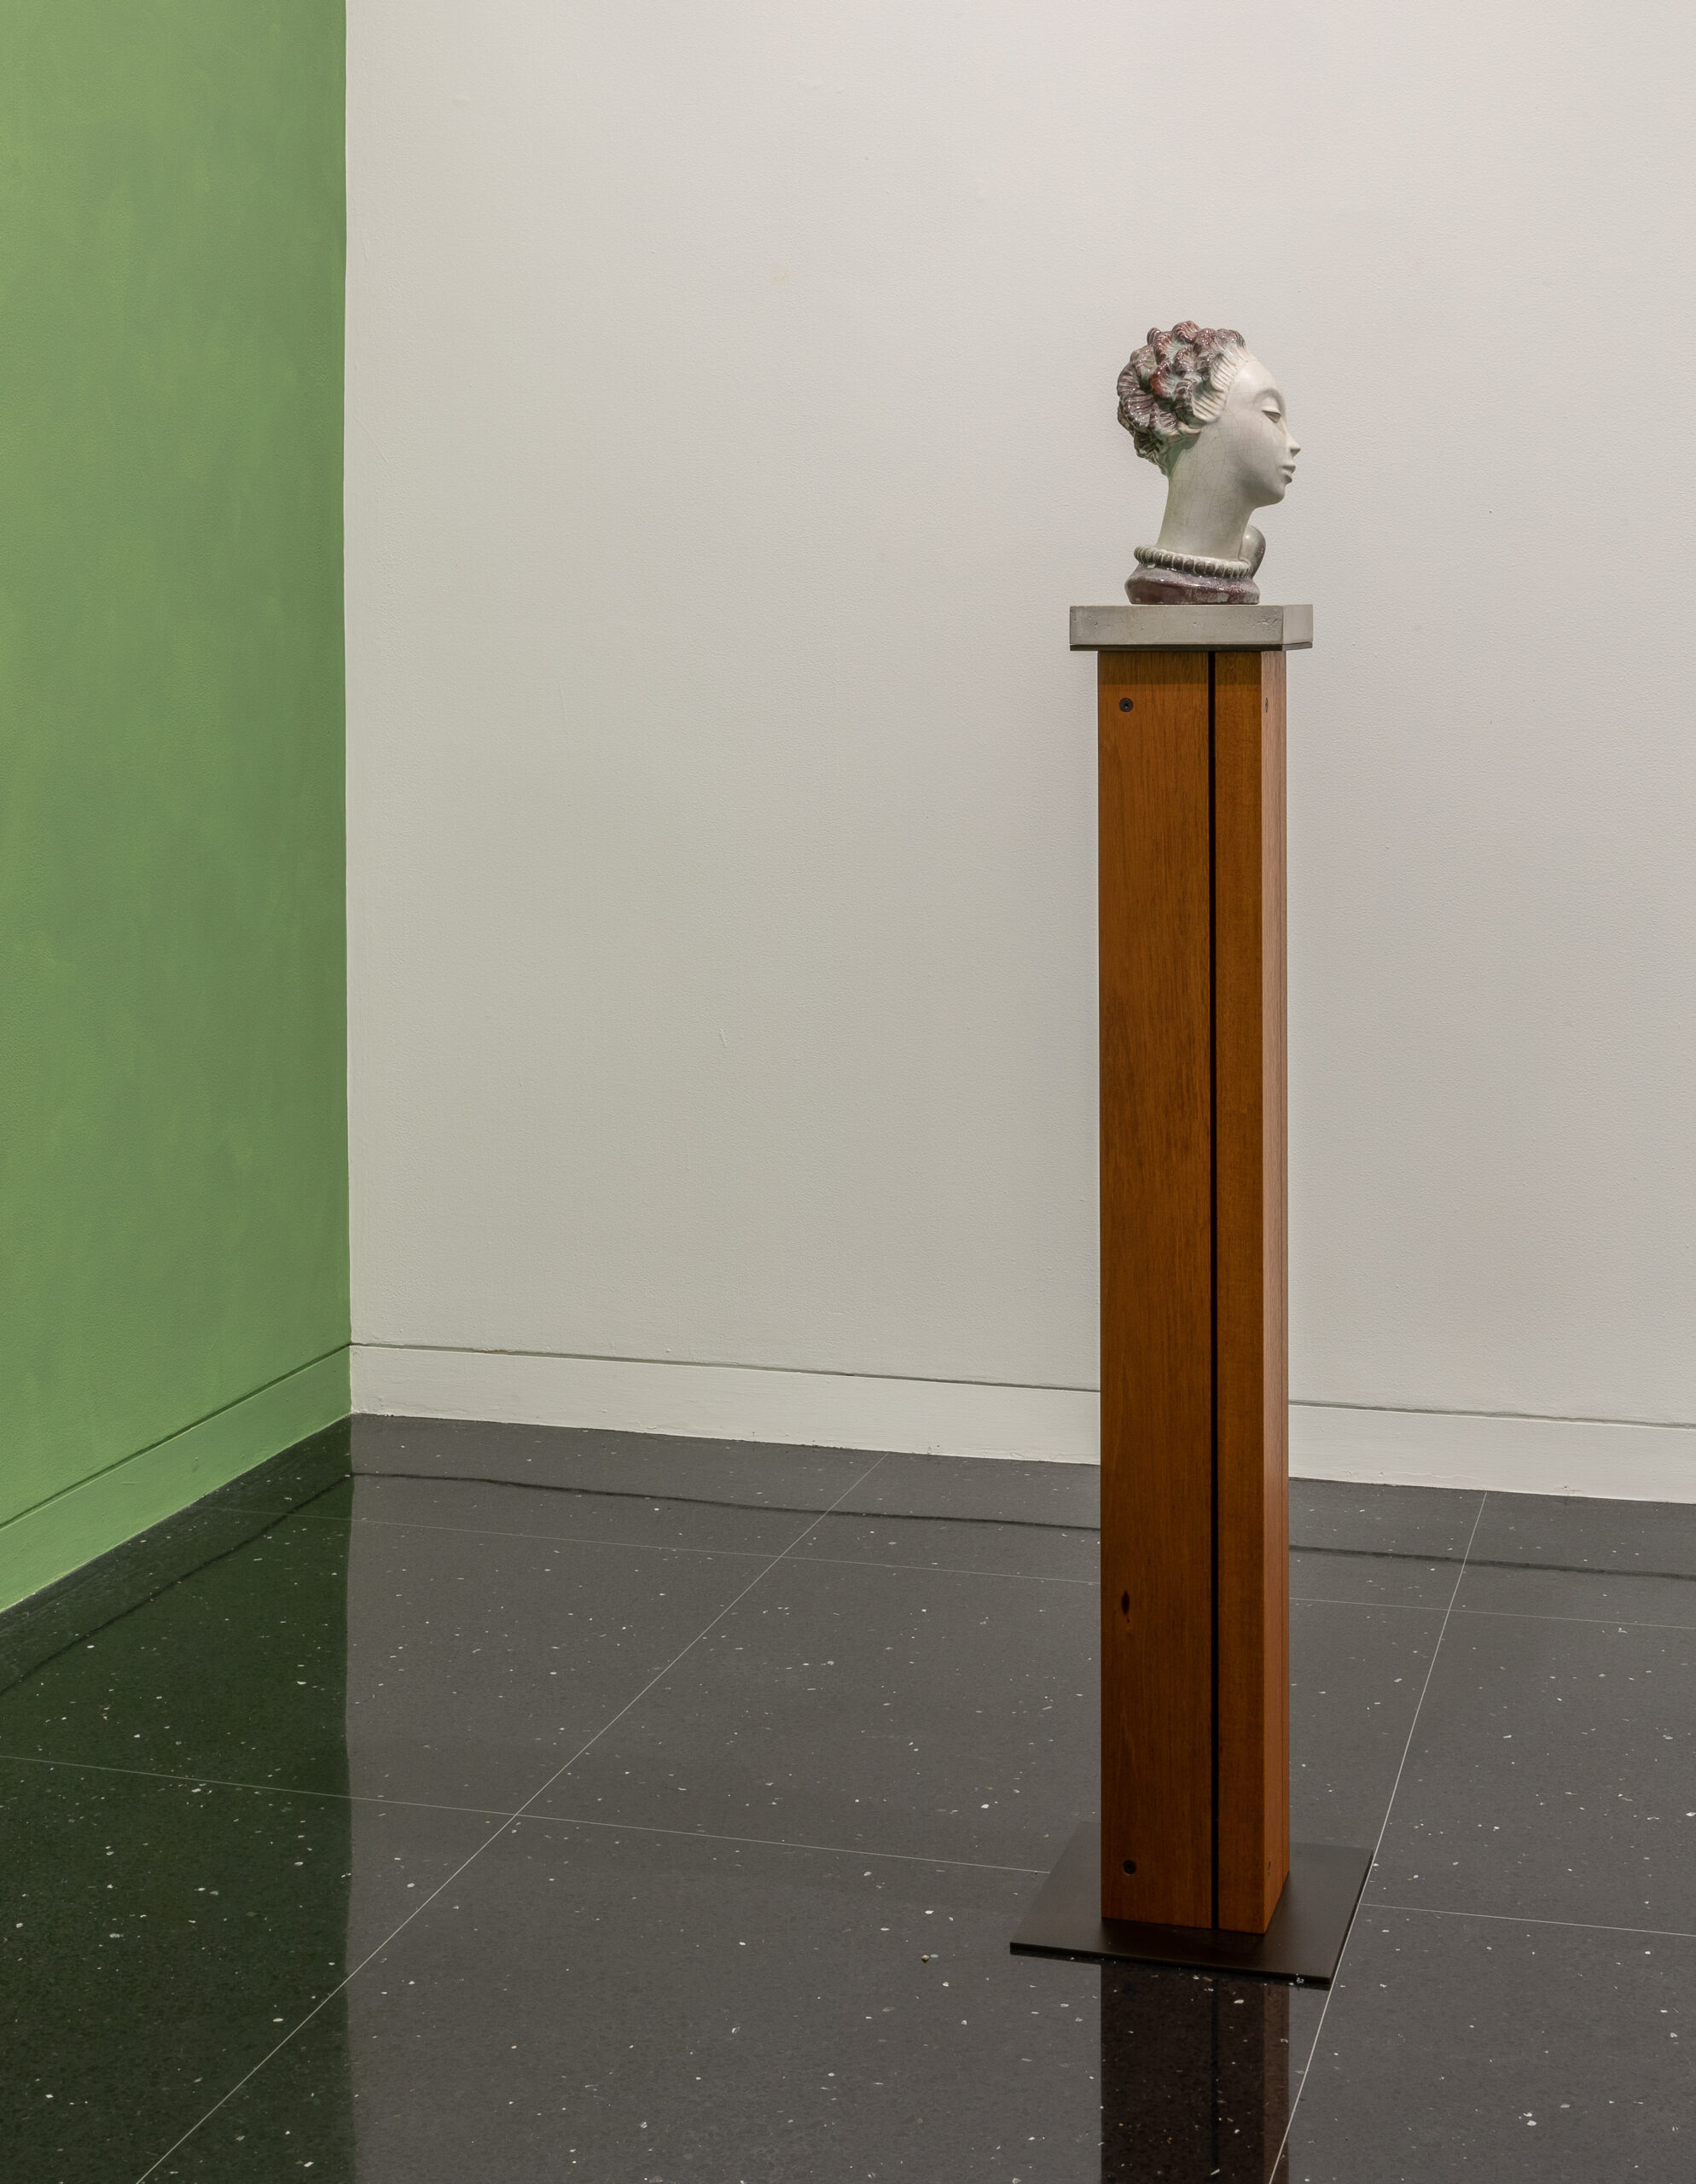 A sculpture of a human head on a brown pedestal. Behind the sculpture, one gallery wall is painted pea green.